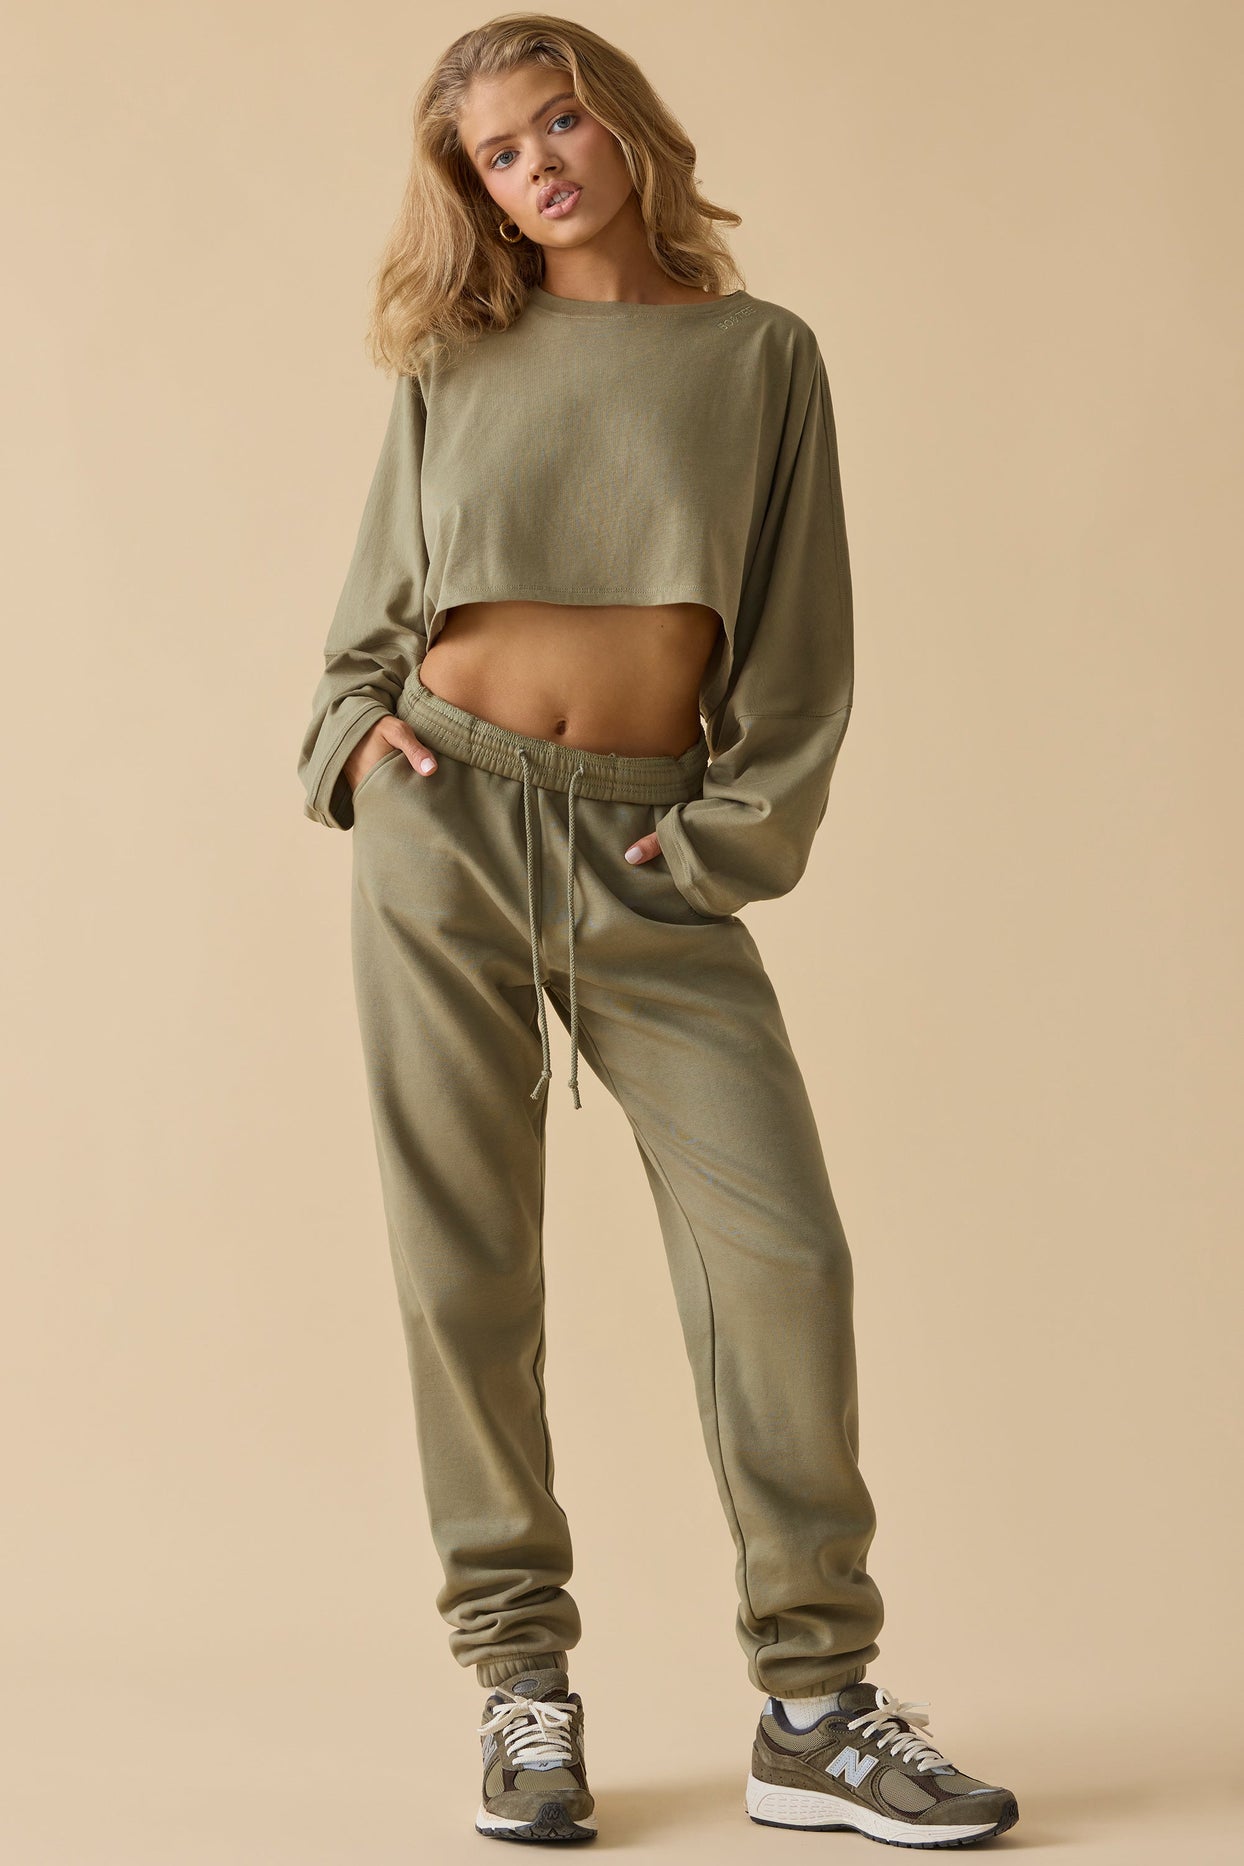 Oversized Long Sleeve Crop Top in Soft Olive